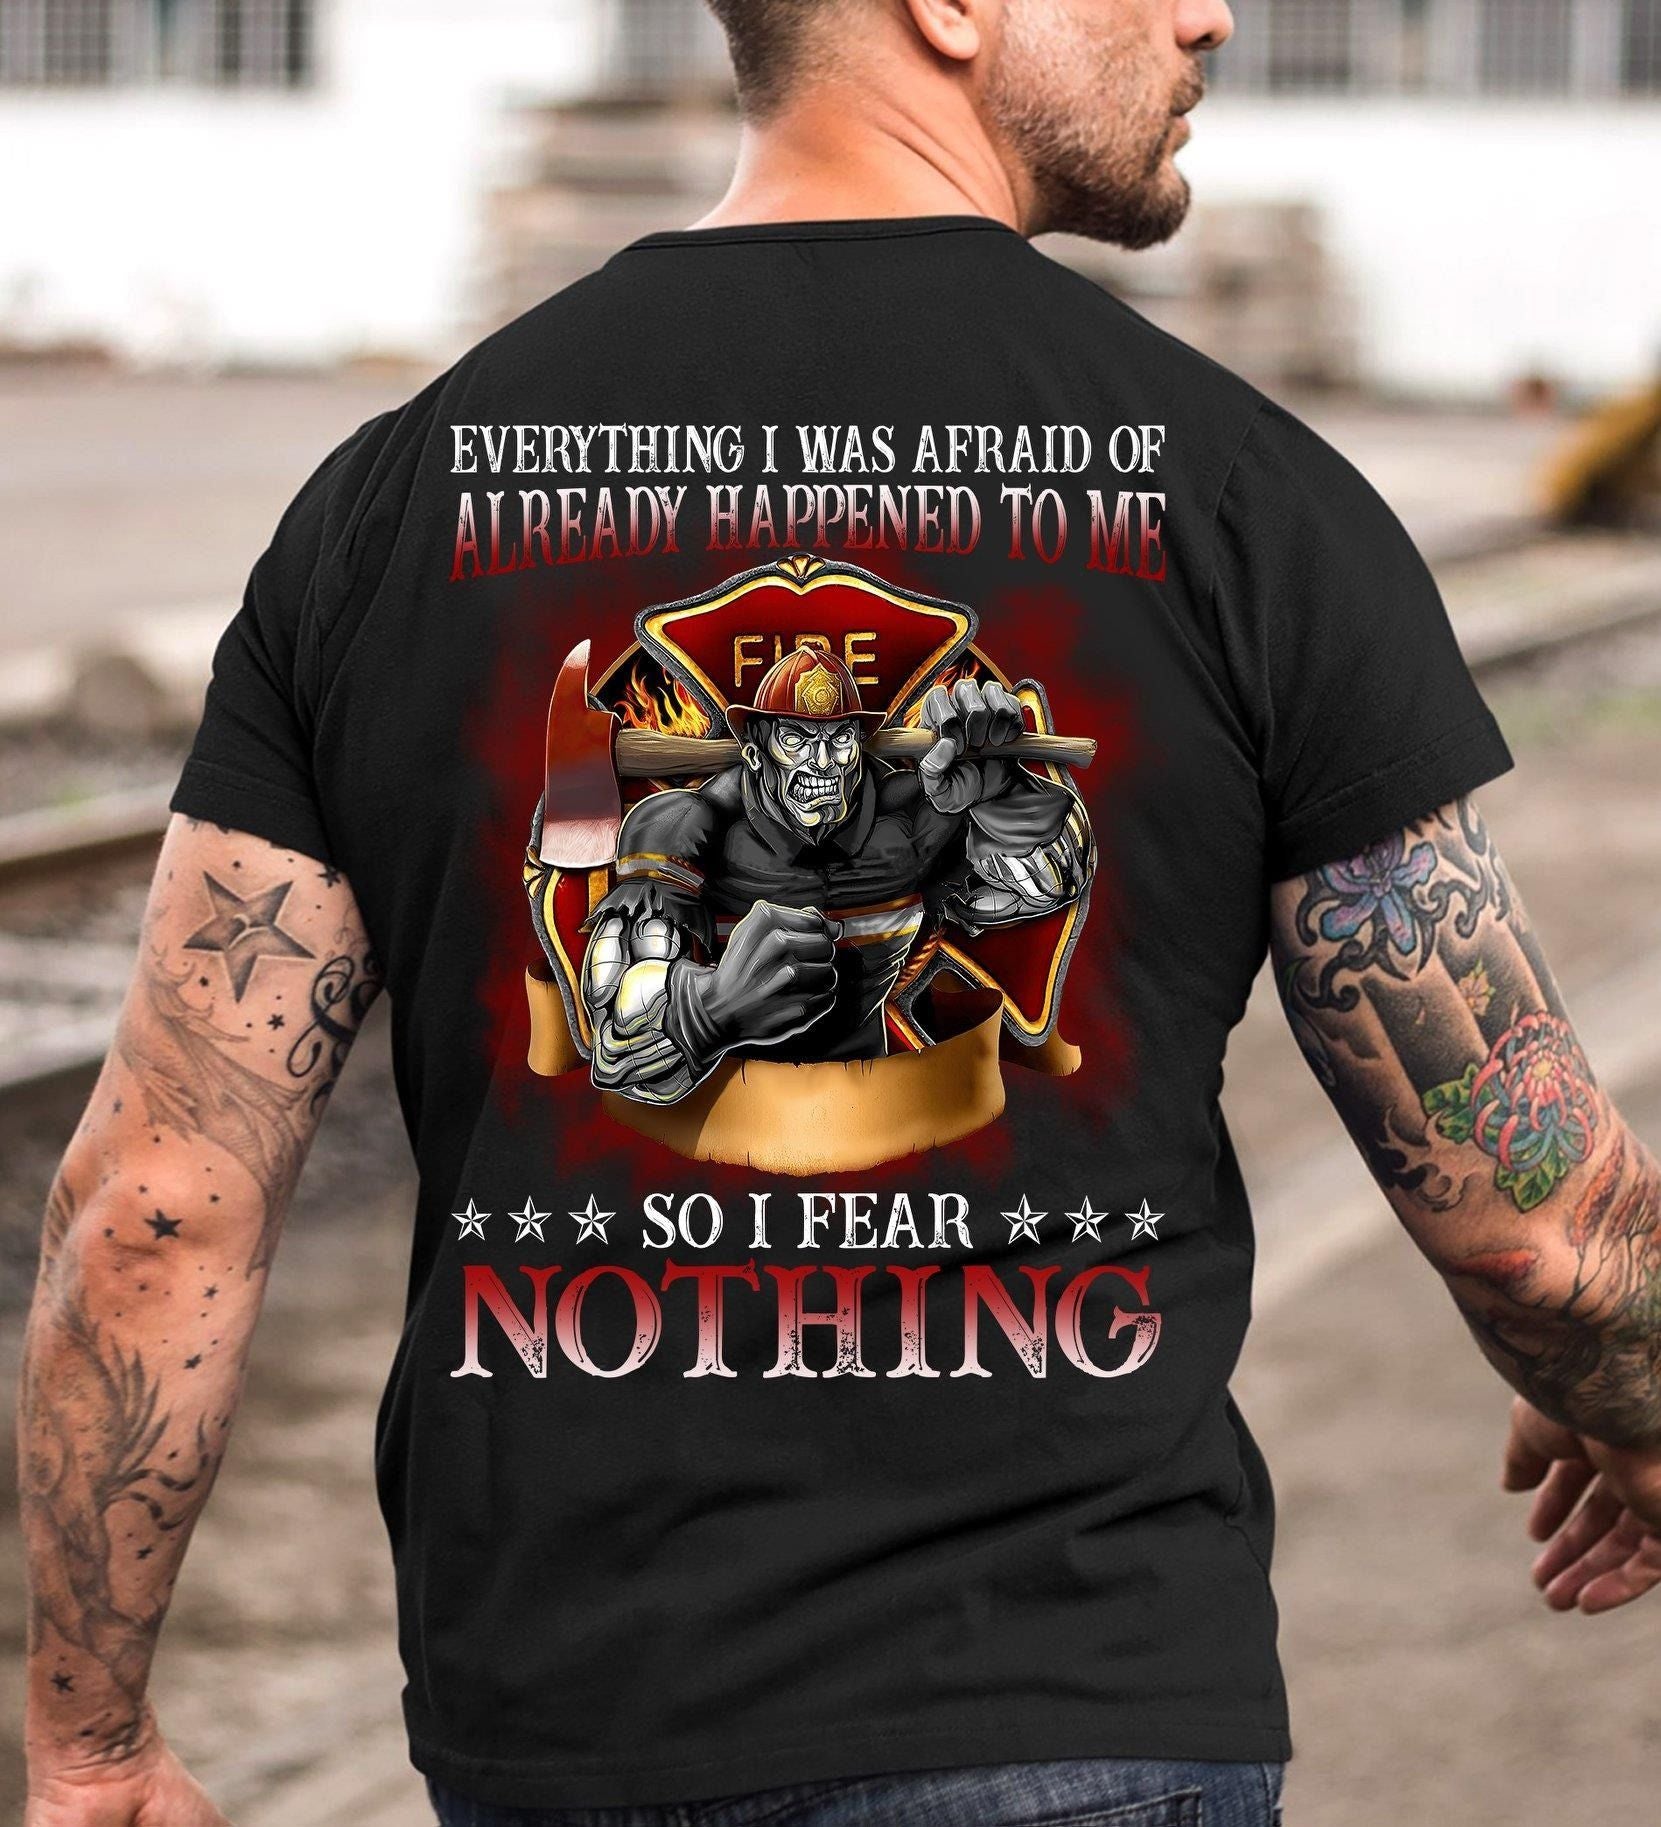 PresentsPrints, firefighter Everything I Was Afraid of It Already Happened to Me so I Fear Nothing T Shirt Hoodie Sweater  Firefighter T-Shirt